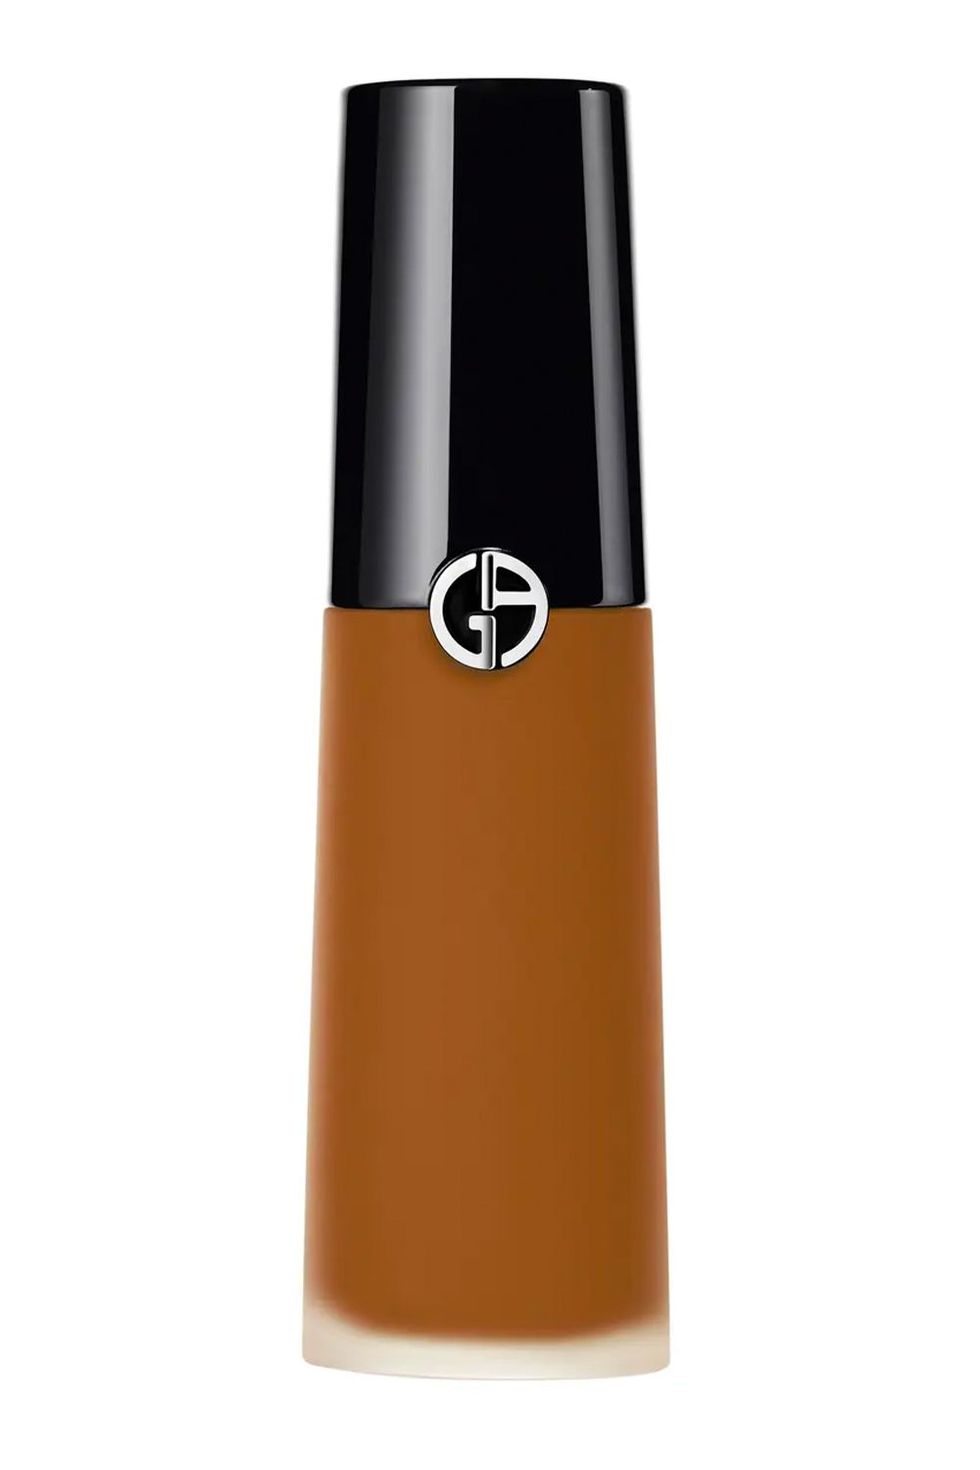 Armani Beauty Luminous Silk Face and Under-Eye Concealer